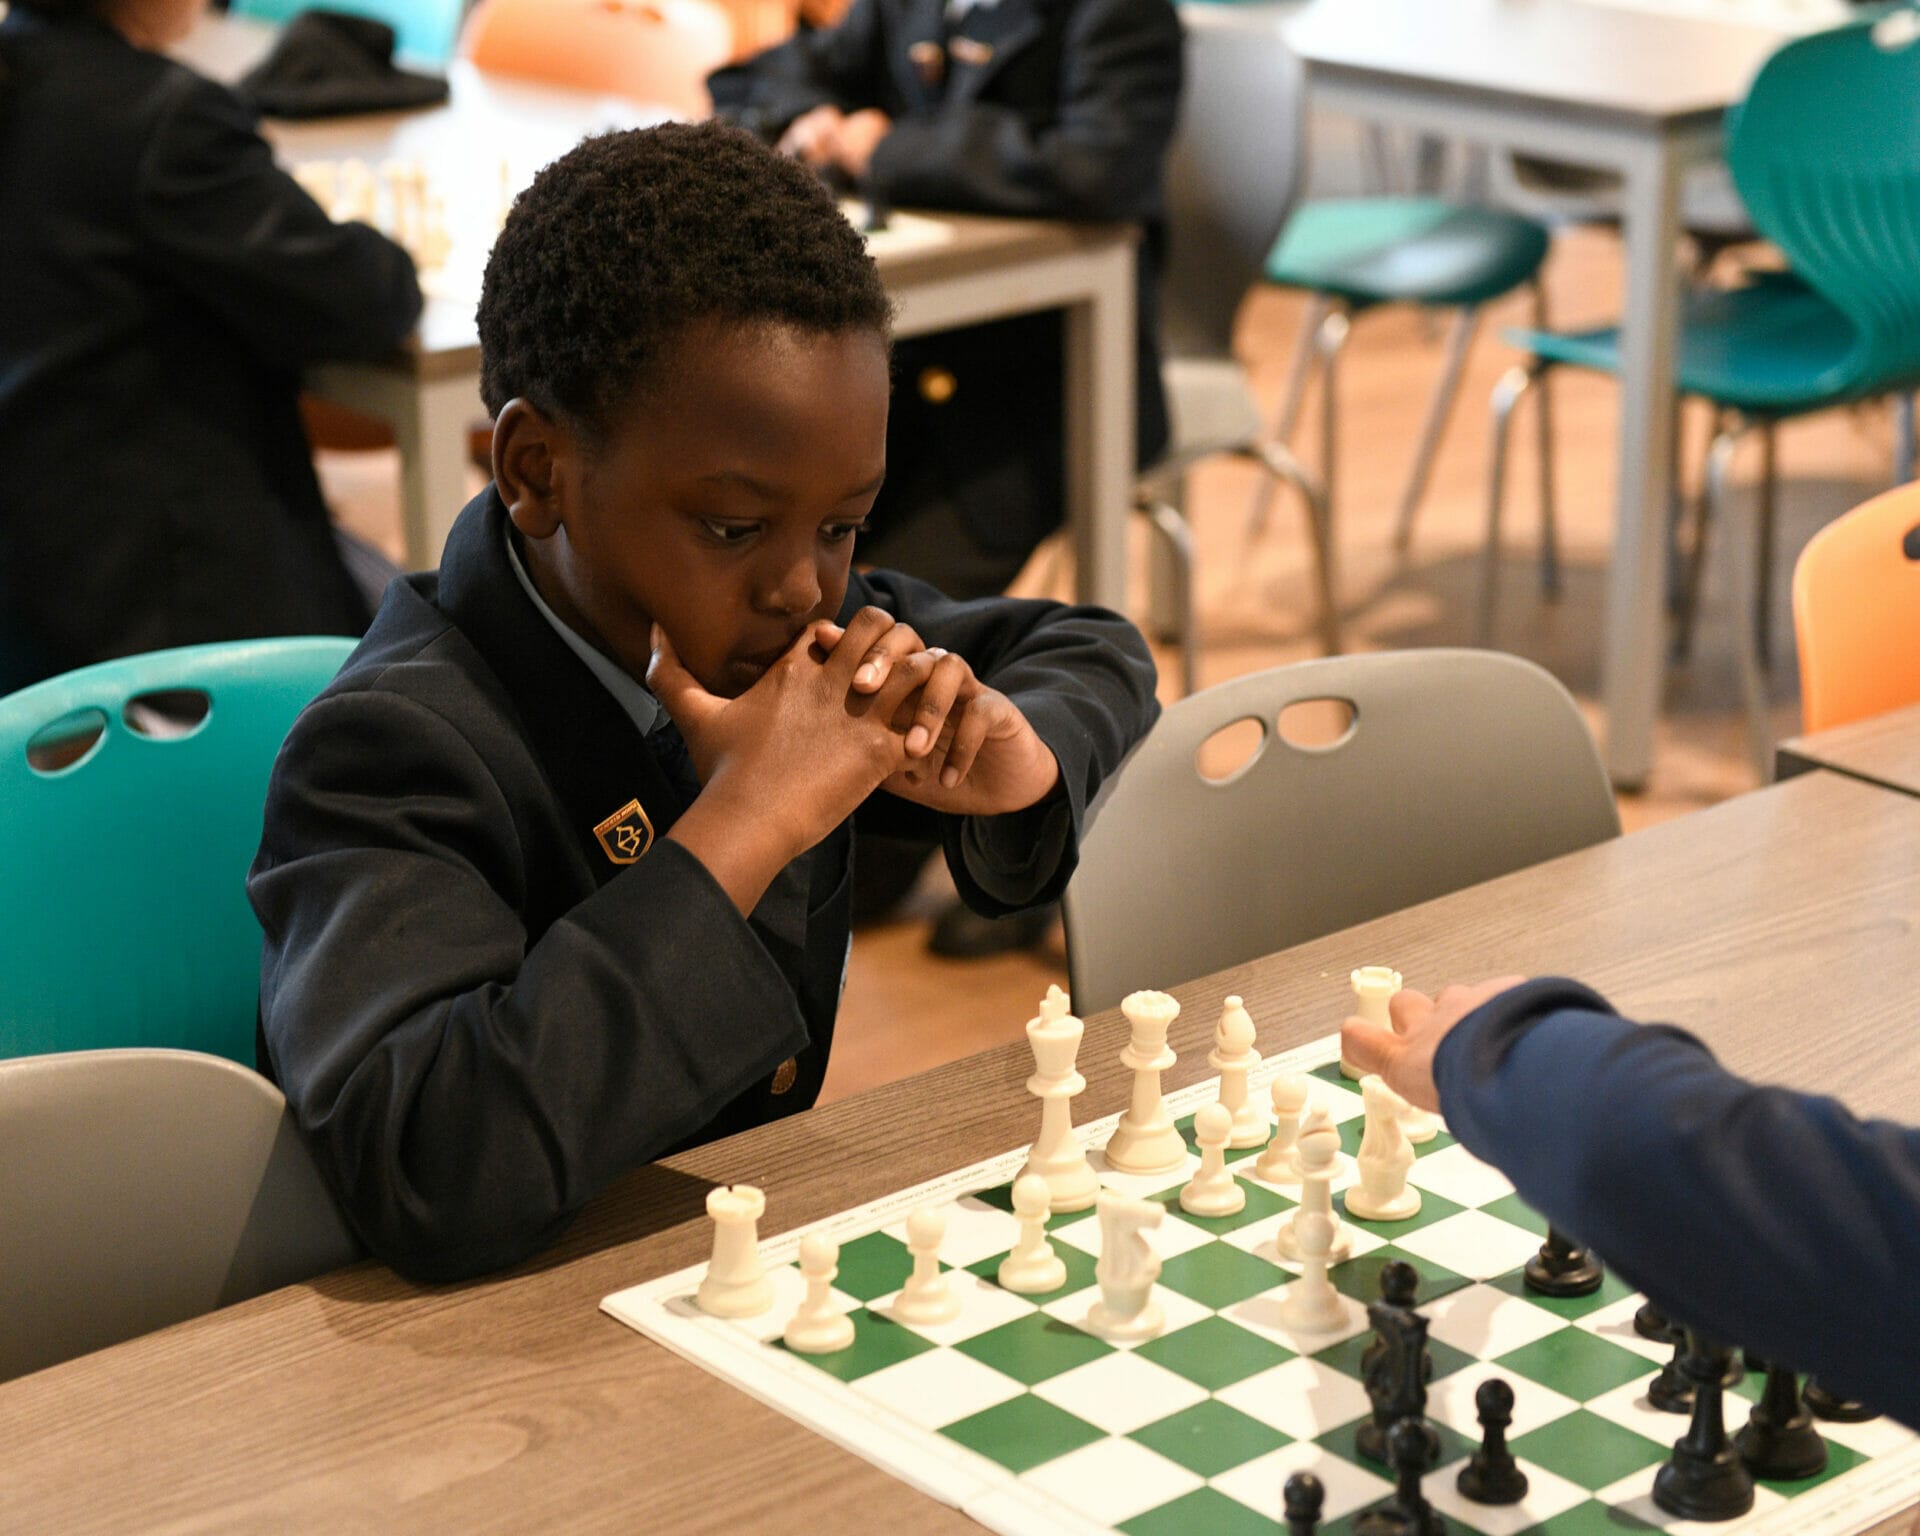 A boy is sat at a table playing chess. His opponent is making a move and the player in the photo is thinking.